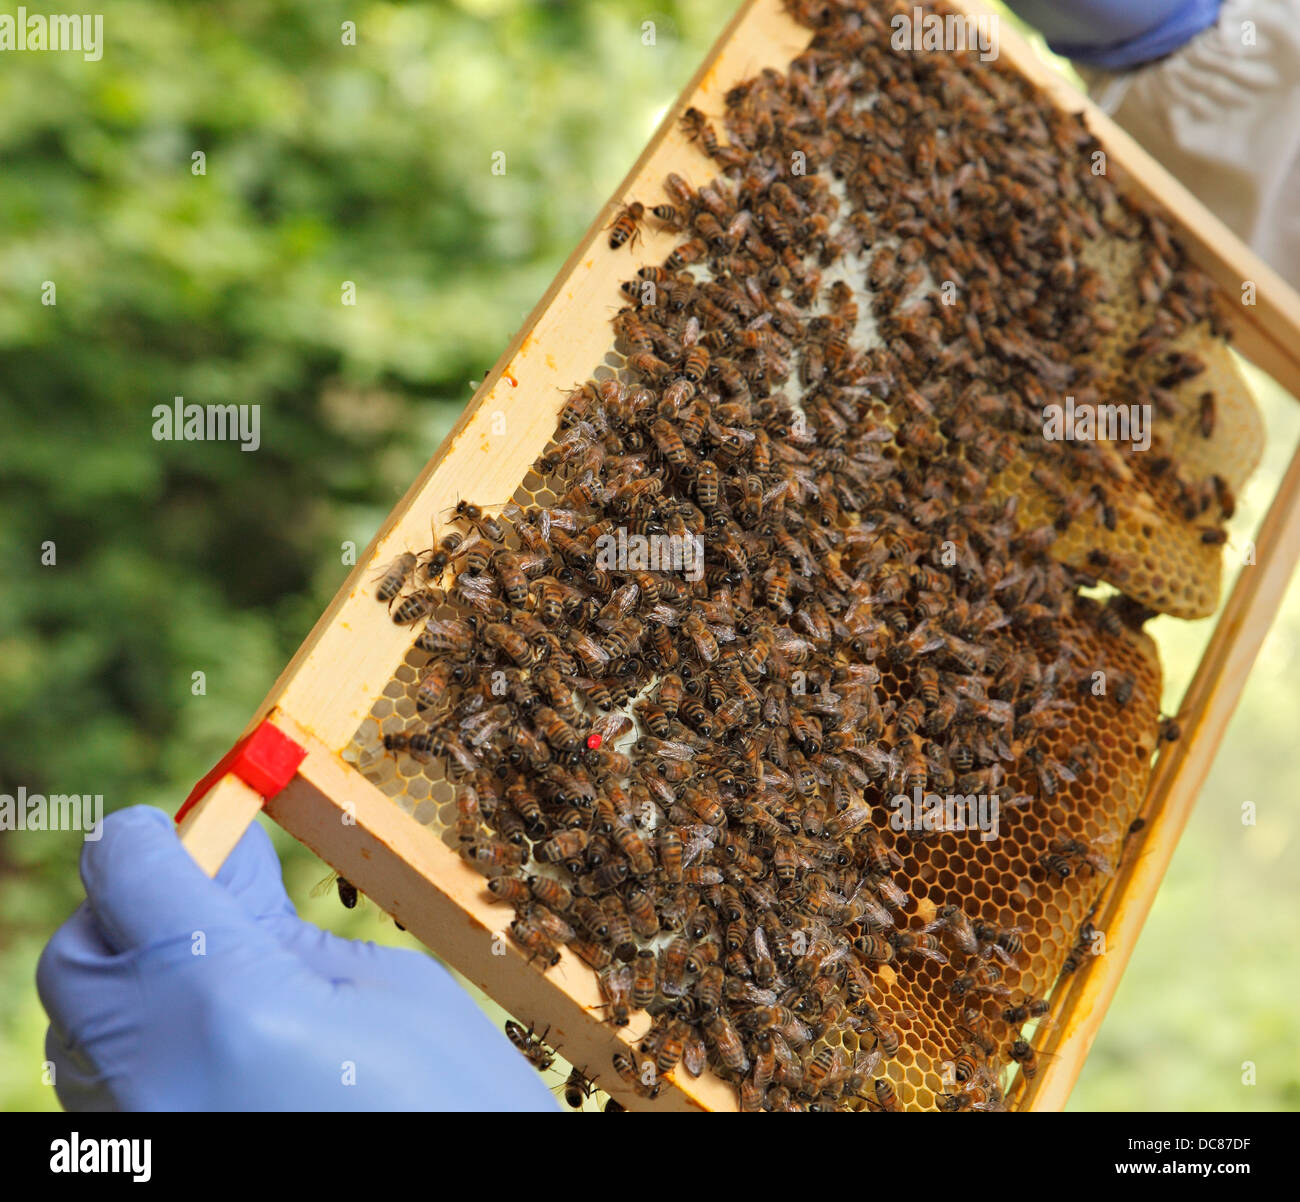 Beekeeper attending to his beehive, the Queen bee can by seen by the red dot. Stock Photo